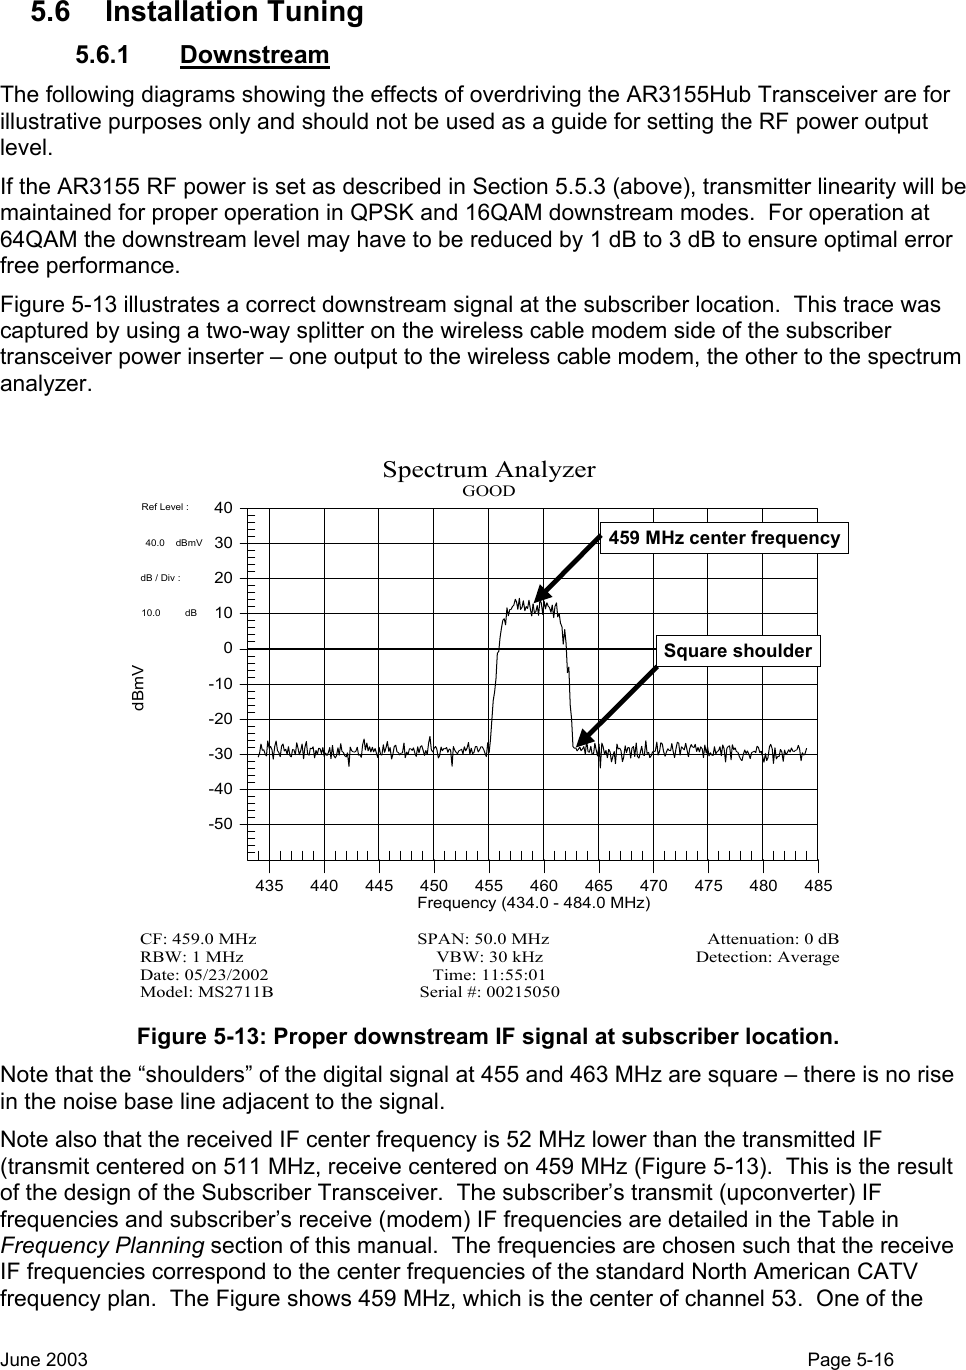   5.6 Installation Tuning 5.6.1 Downstream The following diagrams showing the effects of overdriving the AR3155Hub Transceiver are for illustrative purposes only and should not be used as a guide for setting the RF power output level. If the AR3155 RF power is set as described in Section 5.5.3 (above), transmitter linearity will be maintained for proper operation in QPSK and 16QAM downstream modes.  For operation at 64QAM the downstream level may have to be reduced by 1 dB to 3 dB to ensure optimal error free performance. Figure 5-13 illustrates a correct downstream signal at the subscriber location.  This trace was captured by using a two-way splitter on the wireless cable modem side of the subscriber transceiver power inserter – one output to the wireless cable modem, the other to the spectrum analyzer.    -50-40-30-20-10010203040435440445450455460465470475480485Ref Level :                 40.0    dBmV             dB / Div :                    10.0         dB              Spectrum AnalyzerGOODModel: MS2711B Serial #: 00215050Date: 05/23/2002      Time: 11:55:01RBW: 1 MHz VBW: 30 kHz Detection: AverageCF: 459.0 MHz    SPAN: 50.0 MHz    Attenuation: 0 dBdBmVFrequency (434.0 - 484.0 MHz)Square shoulder459 MHz center frequency Figure 5-13: Proper downstream IF signal at subscriber location. Note that the “shoulders” of the digital signal at 455 and 463 MHz are square – there is no rise in the noise base line adjacent to the signal. Note also that the received IF center frequency is 52 MHz lower than the transmitted IF (transmit centered on 511 MHz, receive centered on 459 MHz (Figure 5-13).  This is the result of the design of the Subscriber Transceiver.  The subscriber’s transmit (upconverter) IF frequencies and subscriber’s receive (modem) IF frequencies are detailed in the Table in Frequency Planning section of this manual.  The frequencies are chosen such that the receive IF frequencies correspond to the center frequencies of the standard North American CATV frequency plan.  The Figure shows 459 MHz, which is the center of channel 53.  One of the June 2003                                                                                                                                          Page 5-16  